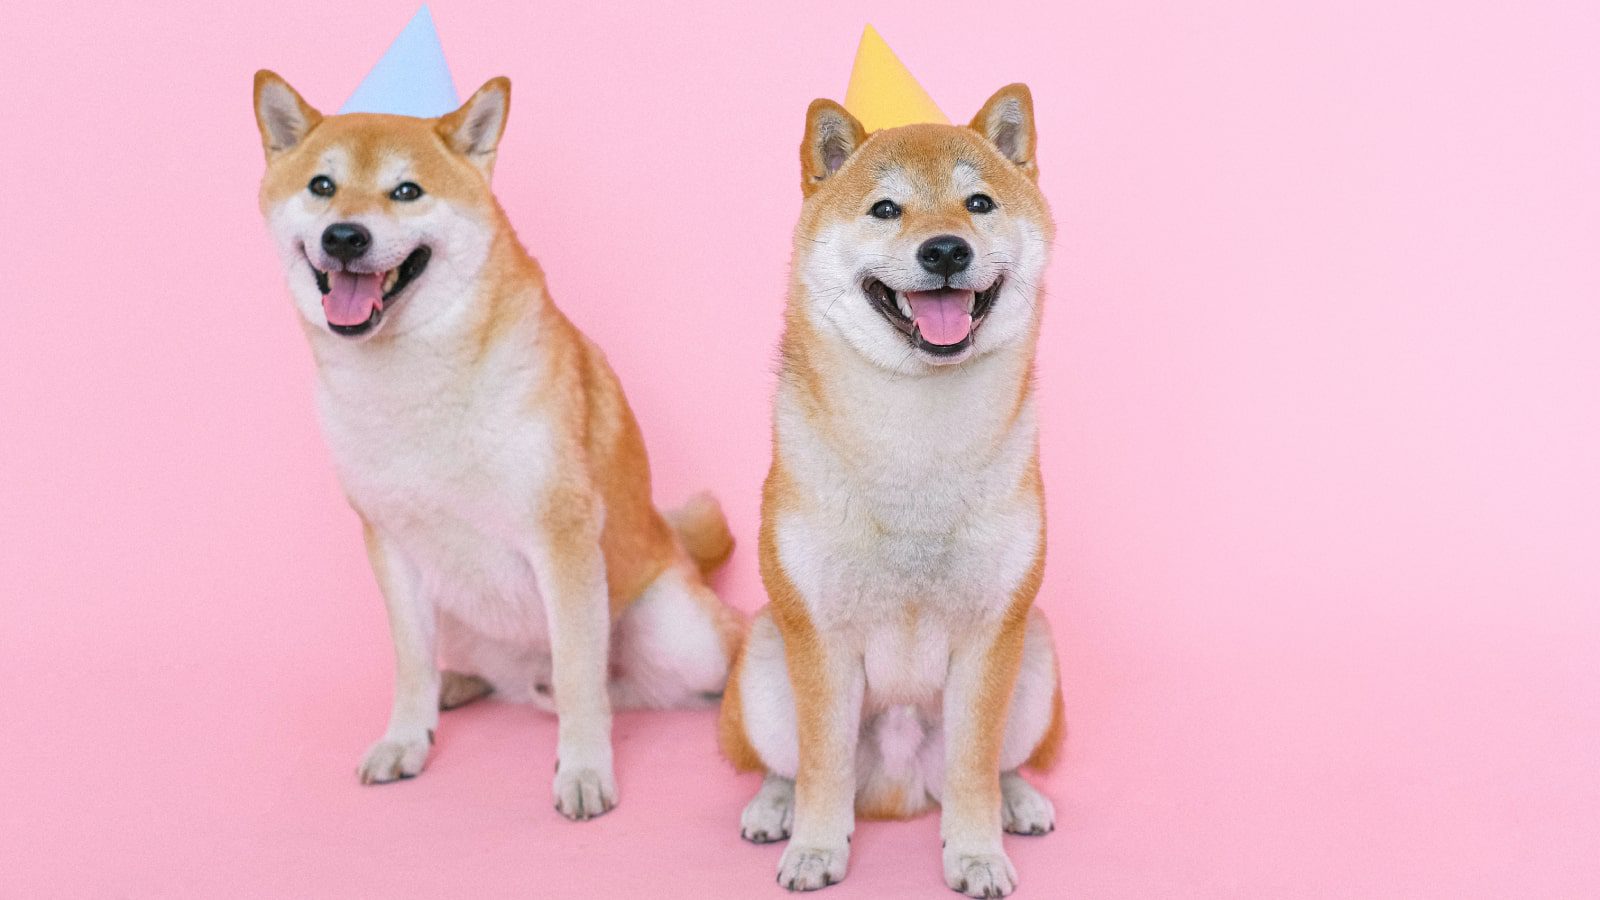 Two Shiba Inu dogs wearing party hats.